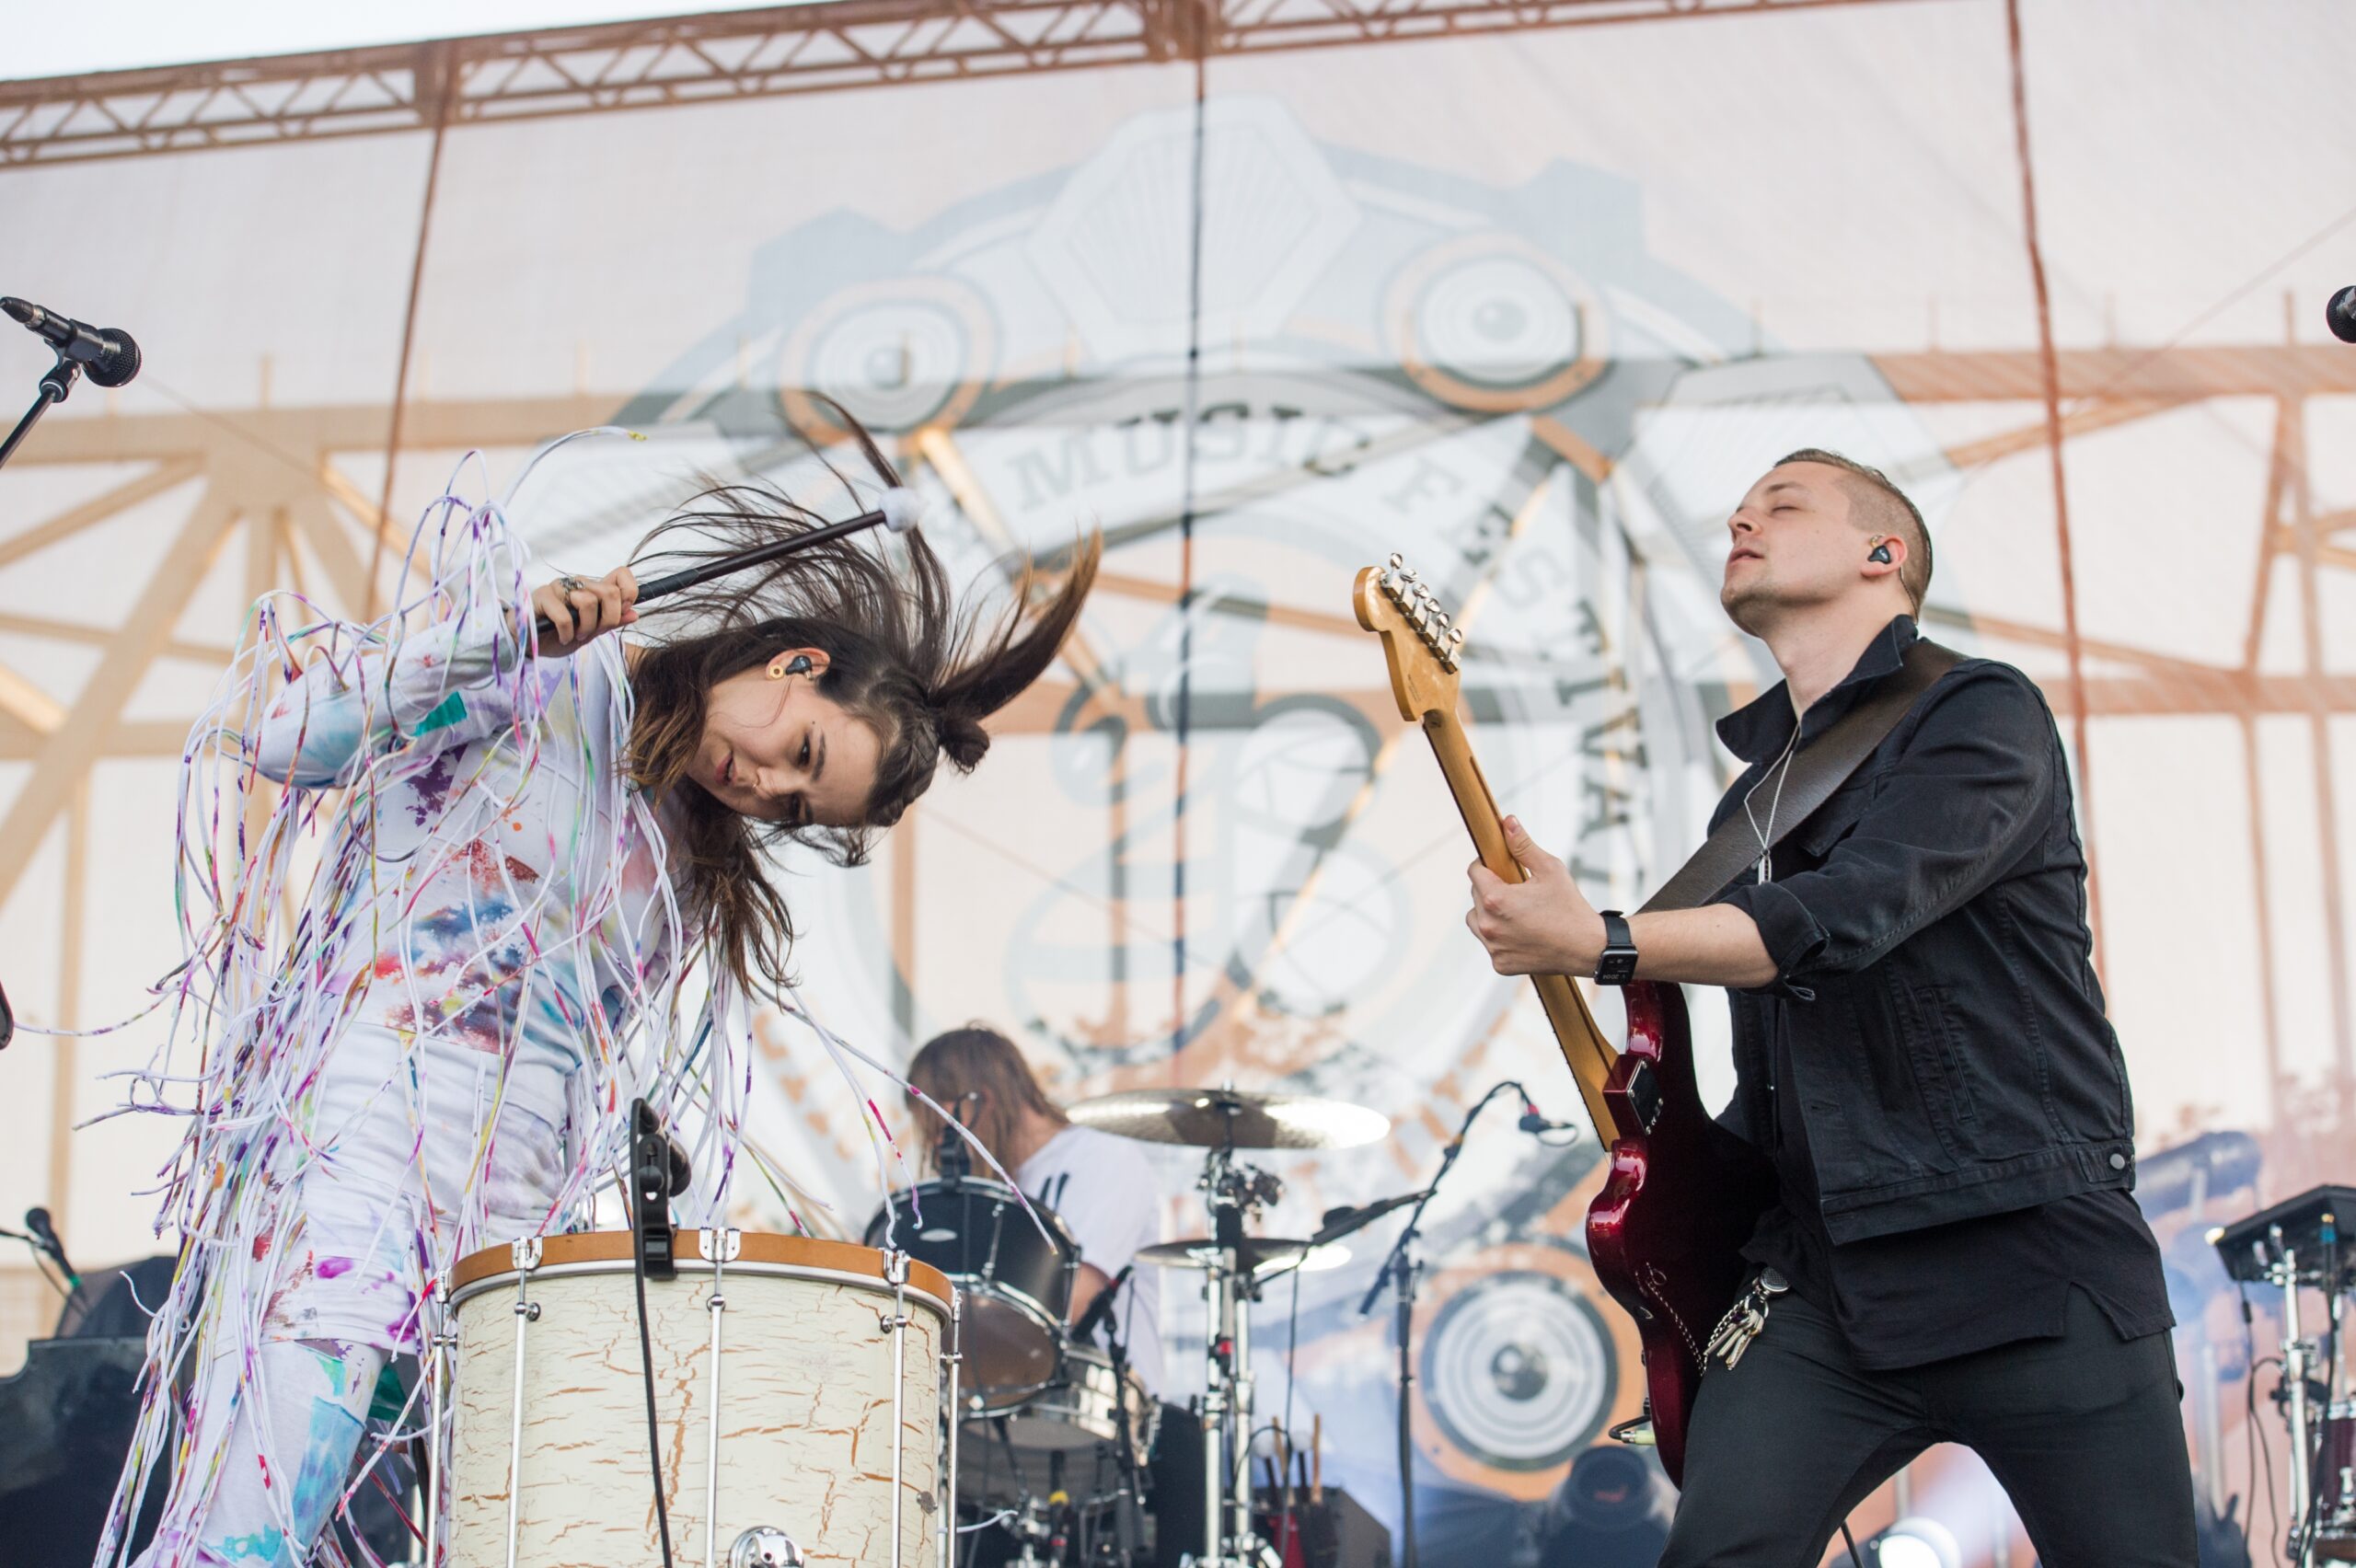 Of Monsters and Men performs